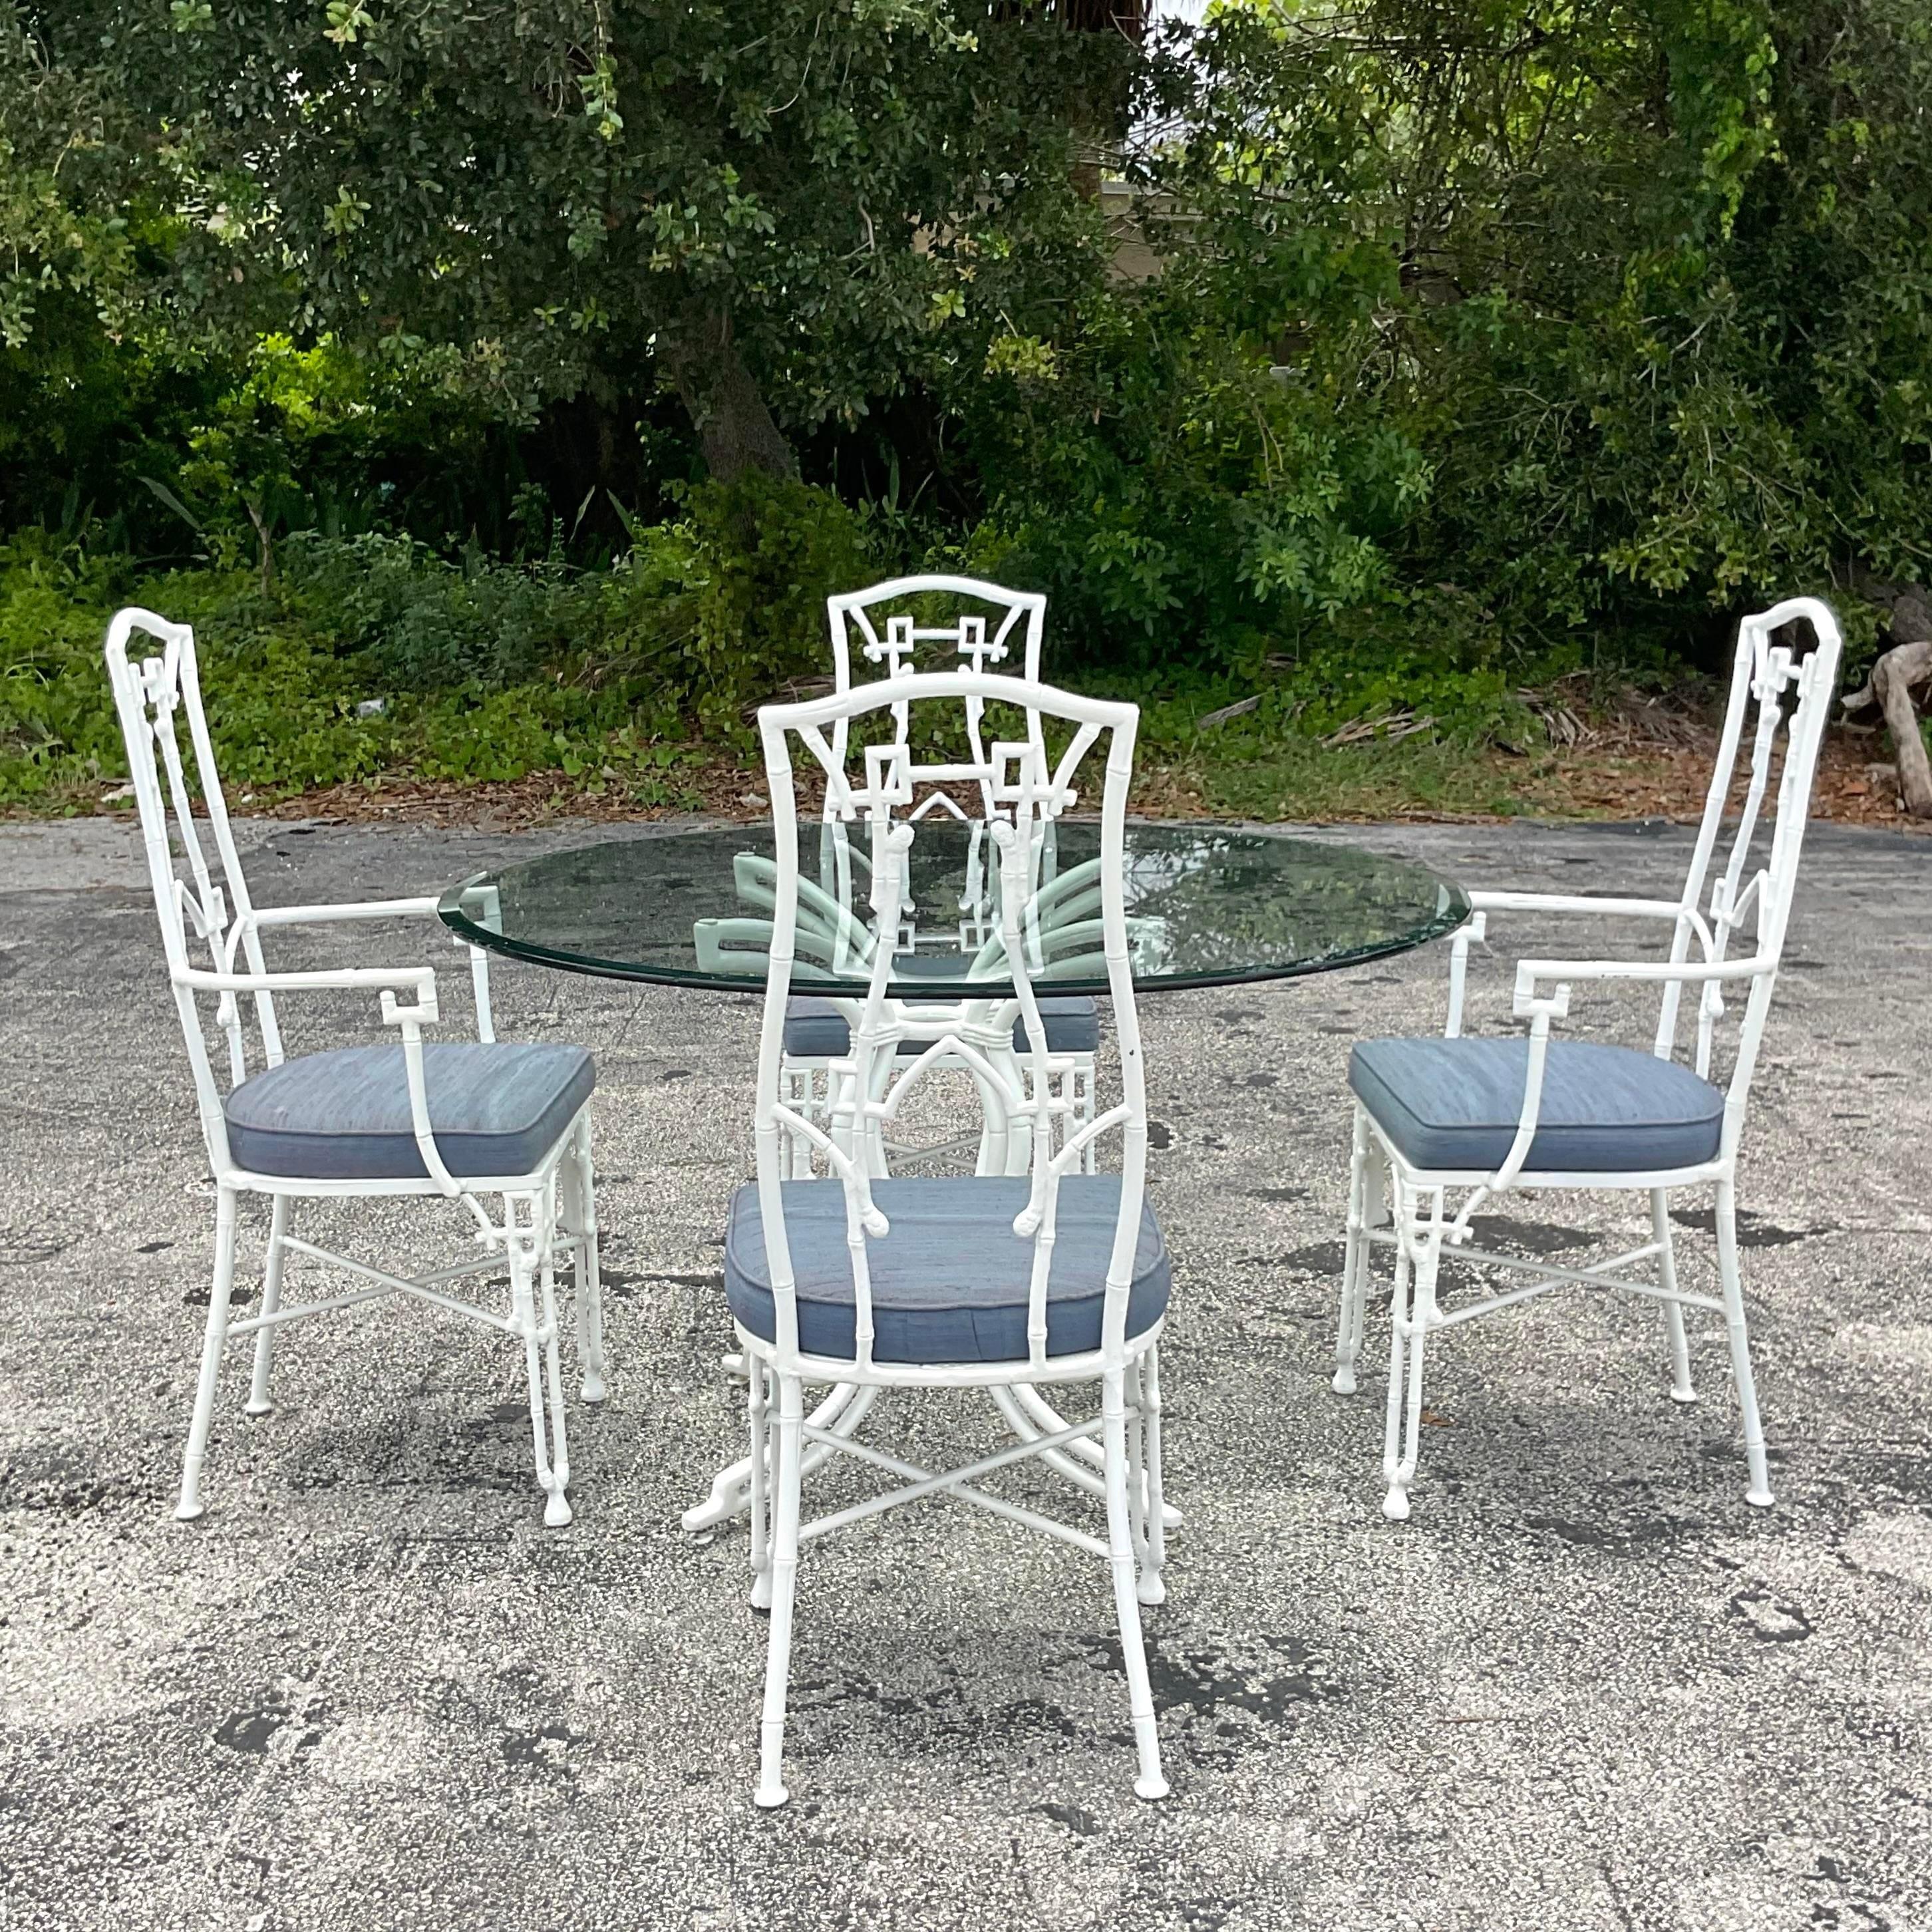 Mid-20th Century Vintage Coastal Cast Aluminum Bamboo Fretwork Outdoor Dining Chairs--Set of 4